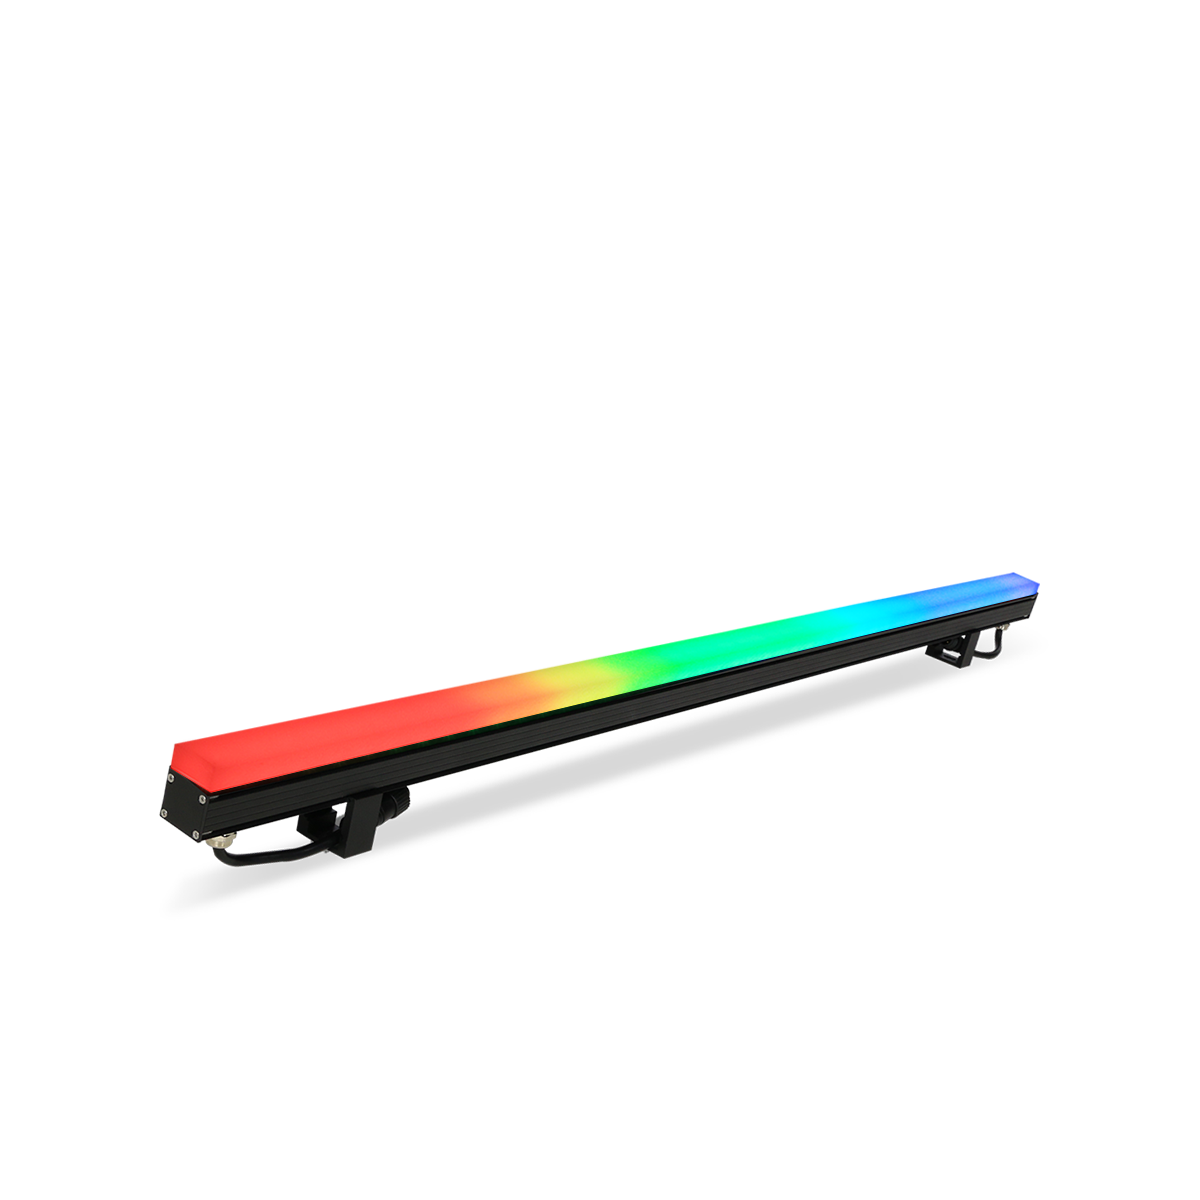 program pavement Pick up leaves PIXIBAR 48-IS - 1m Indoor RGB Digital LED Bar with Square Diffuser -  Cyclops Lighting